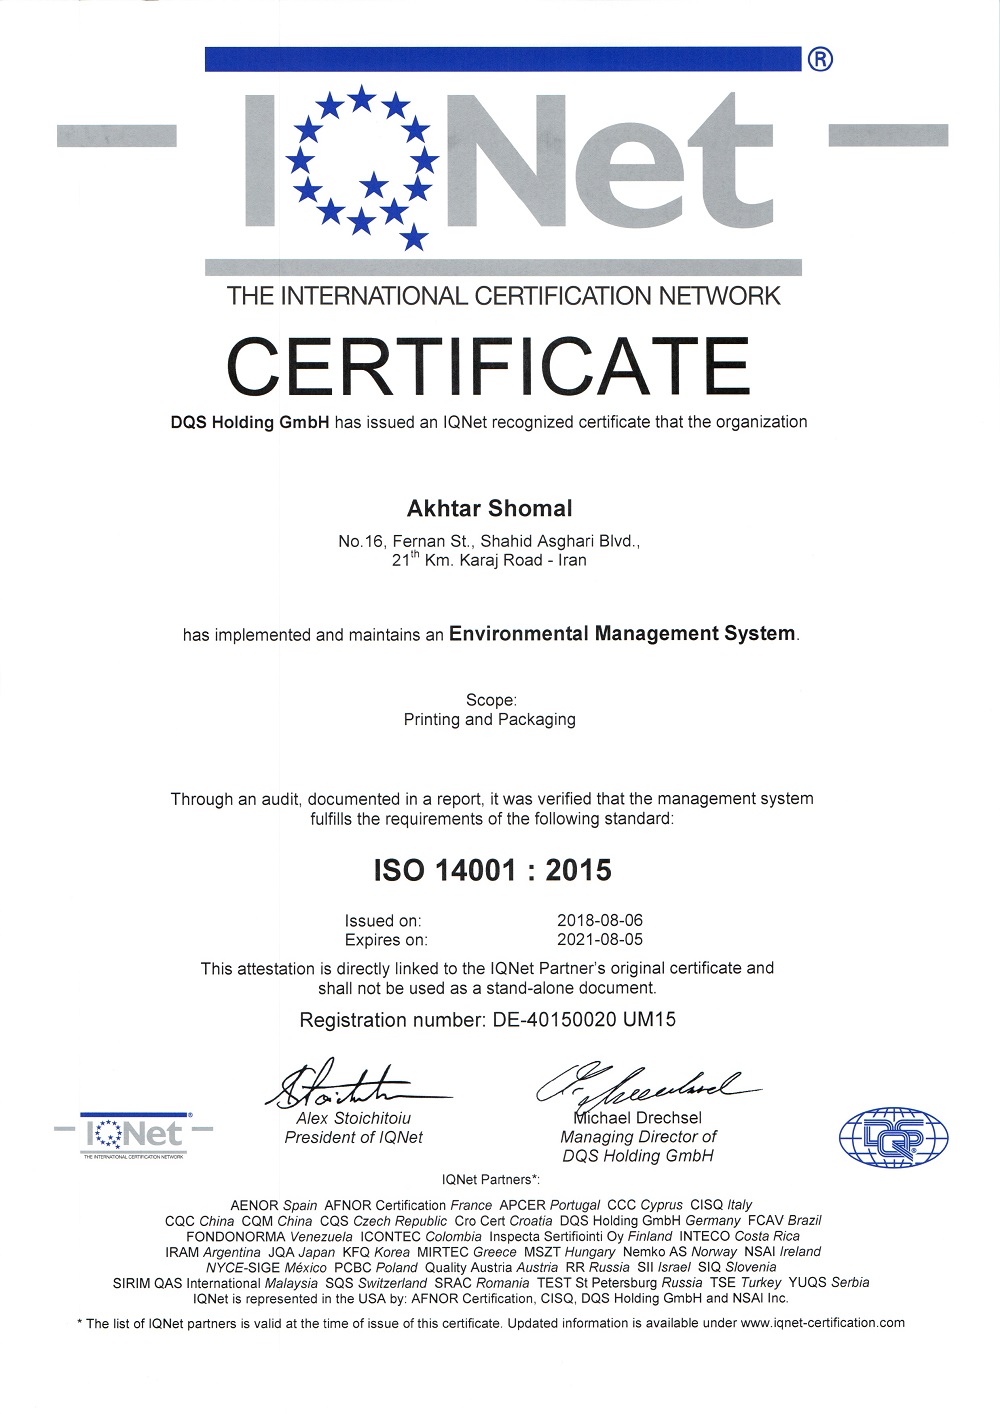 iso14001-2015